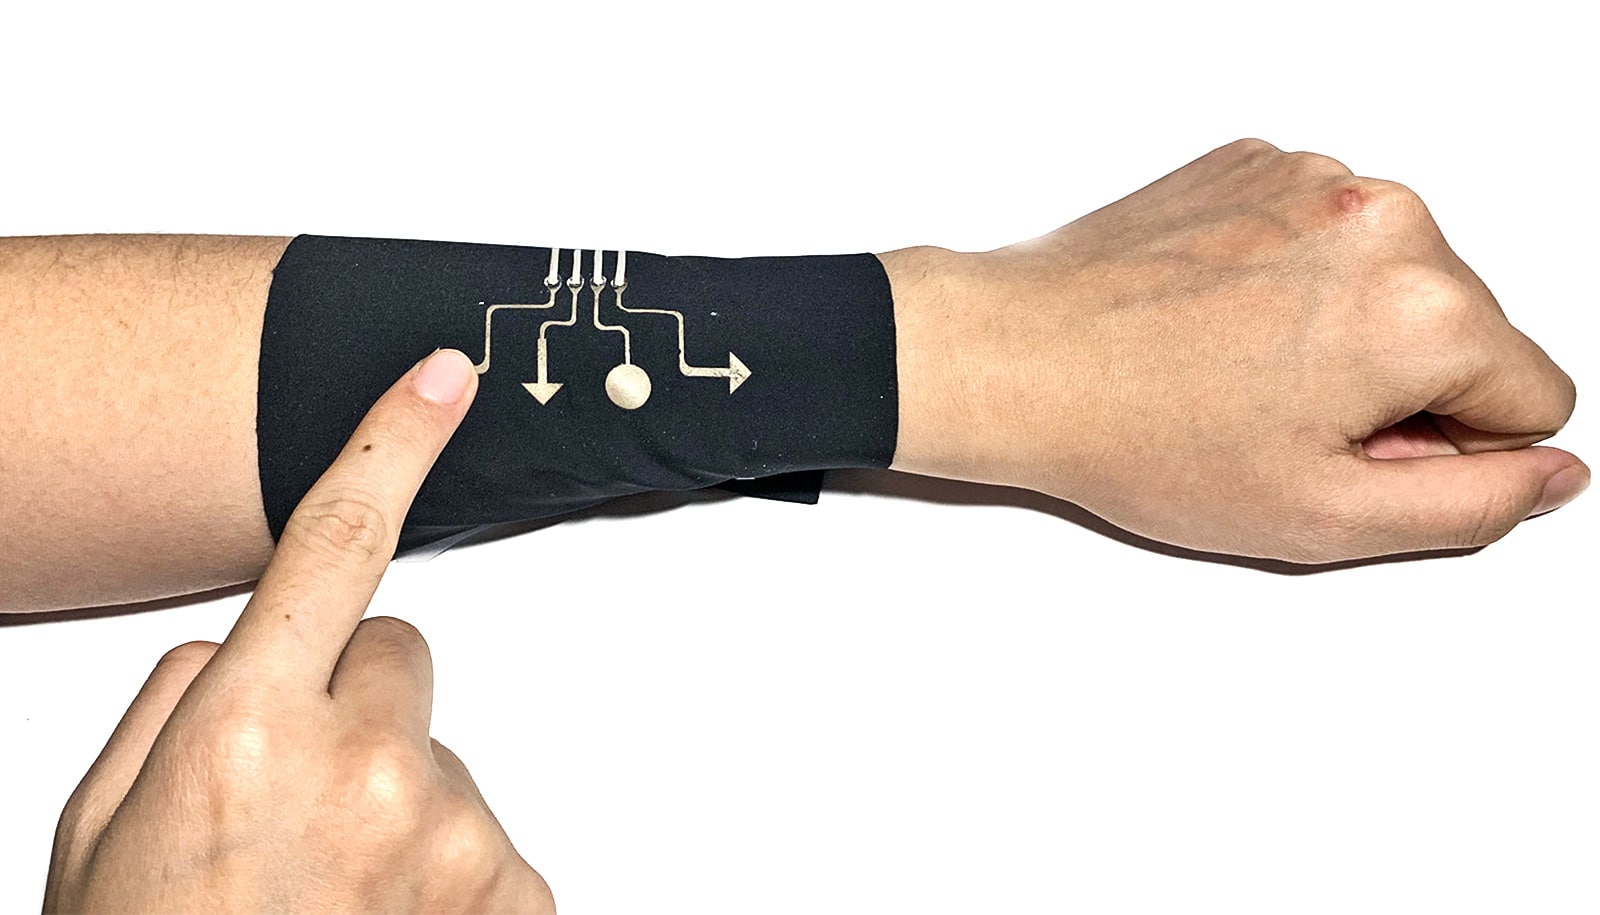 Electronic fabric lets you play Tetris with your arm - Futurity: Research News